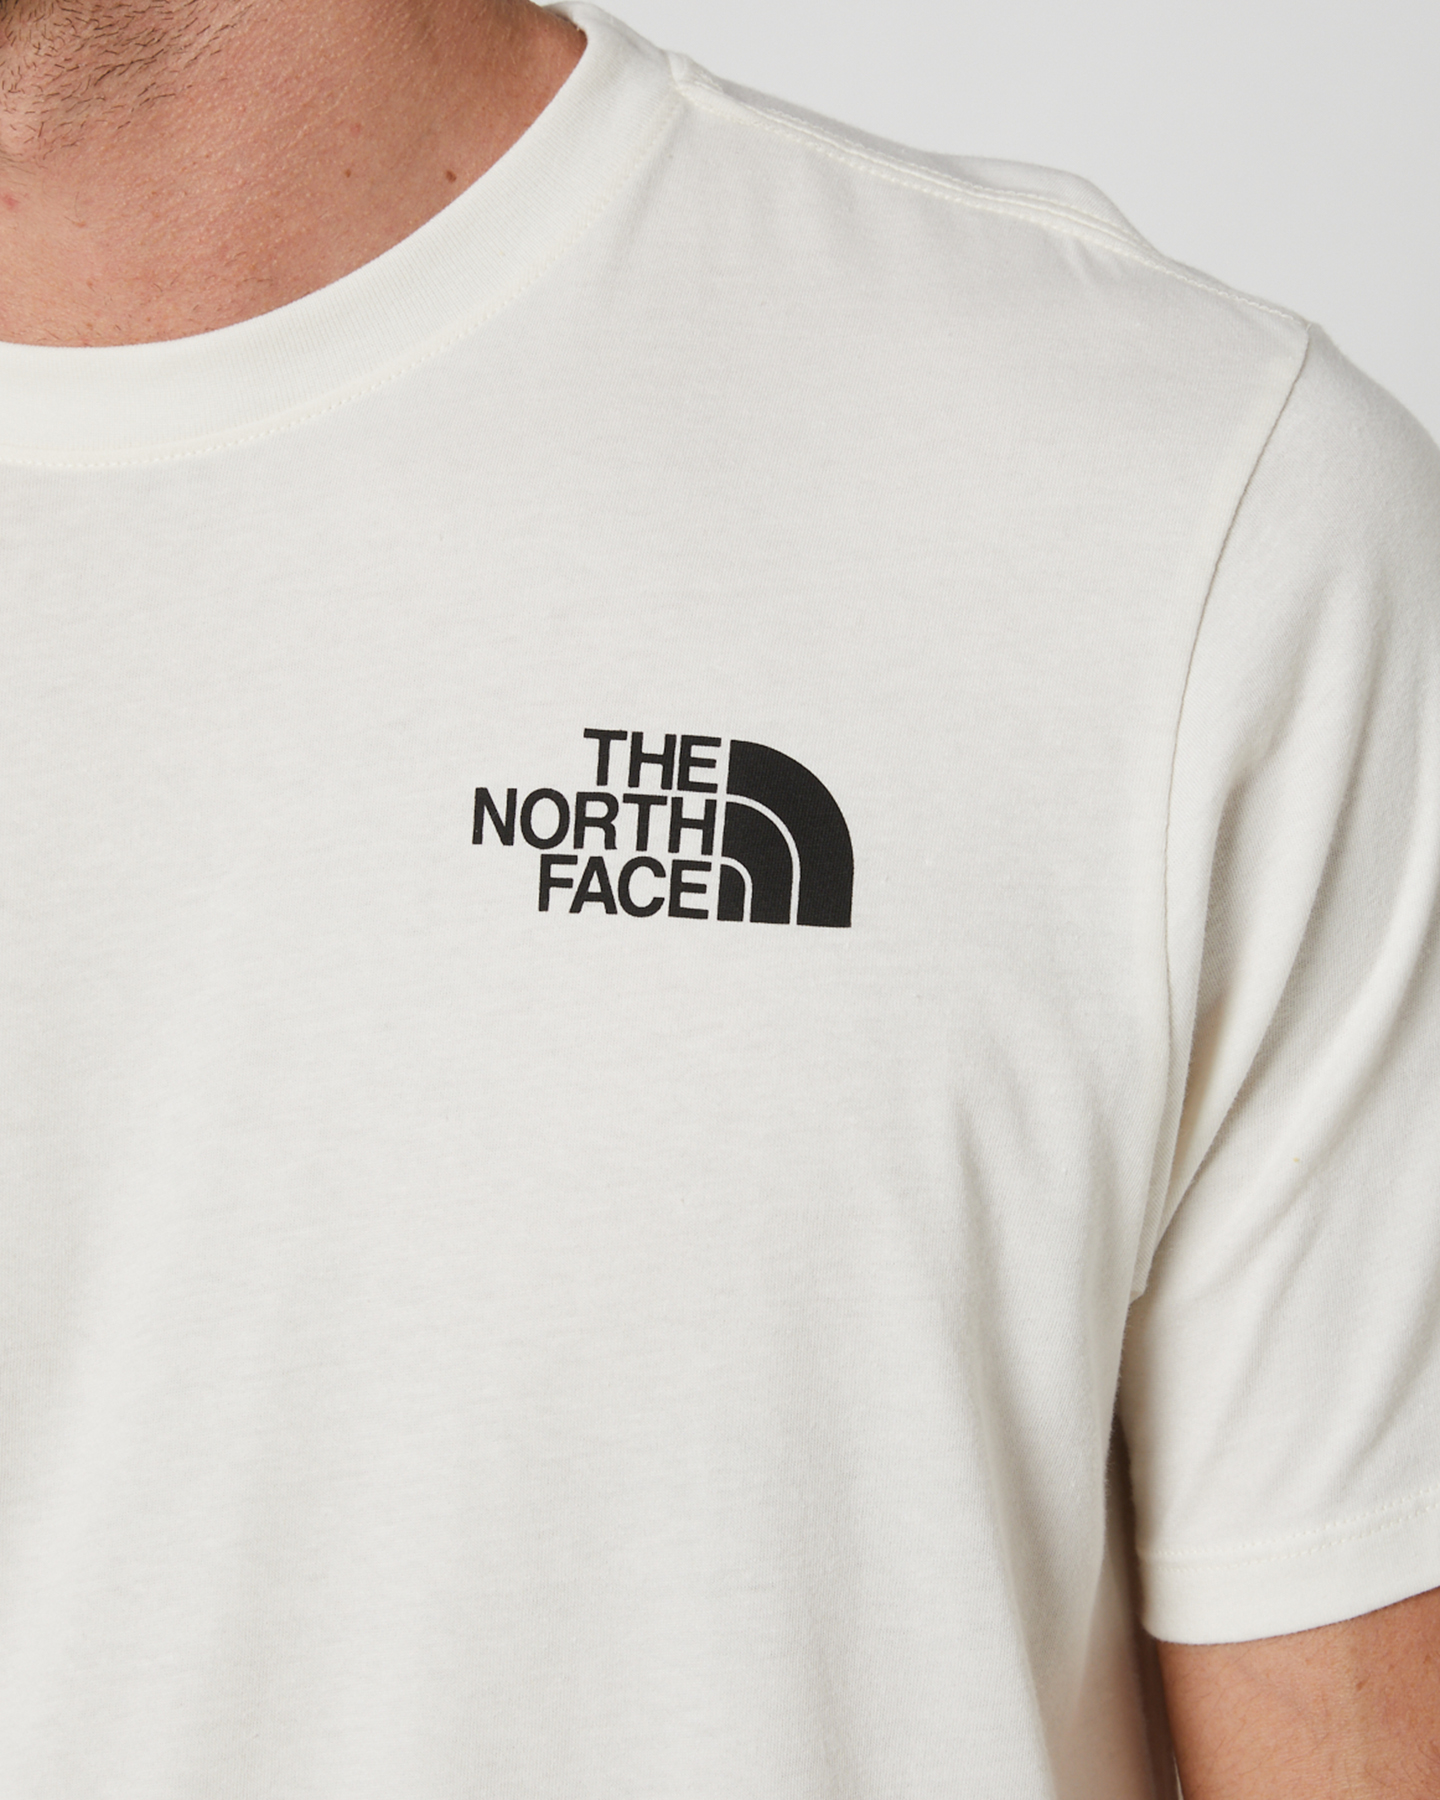 The North Face Mens Short-Sleeve Box Nse Tee - Gardenia White | SurfStitch